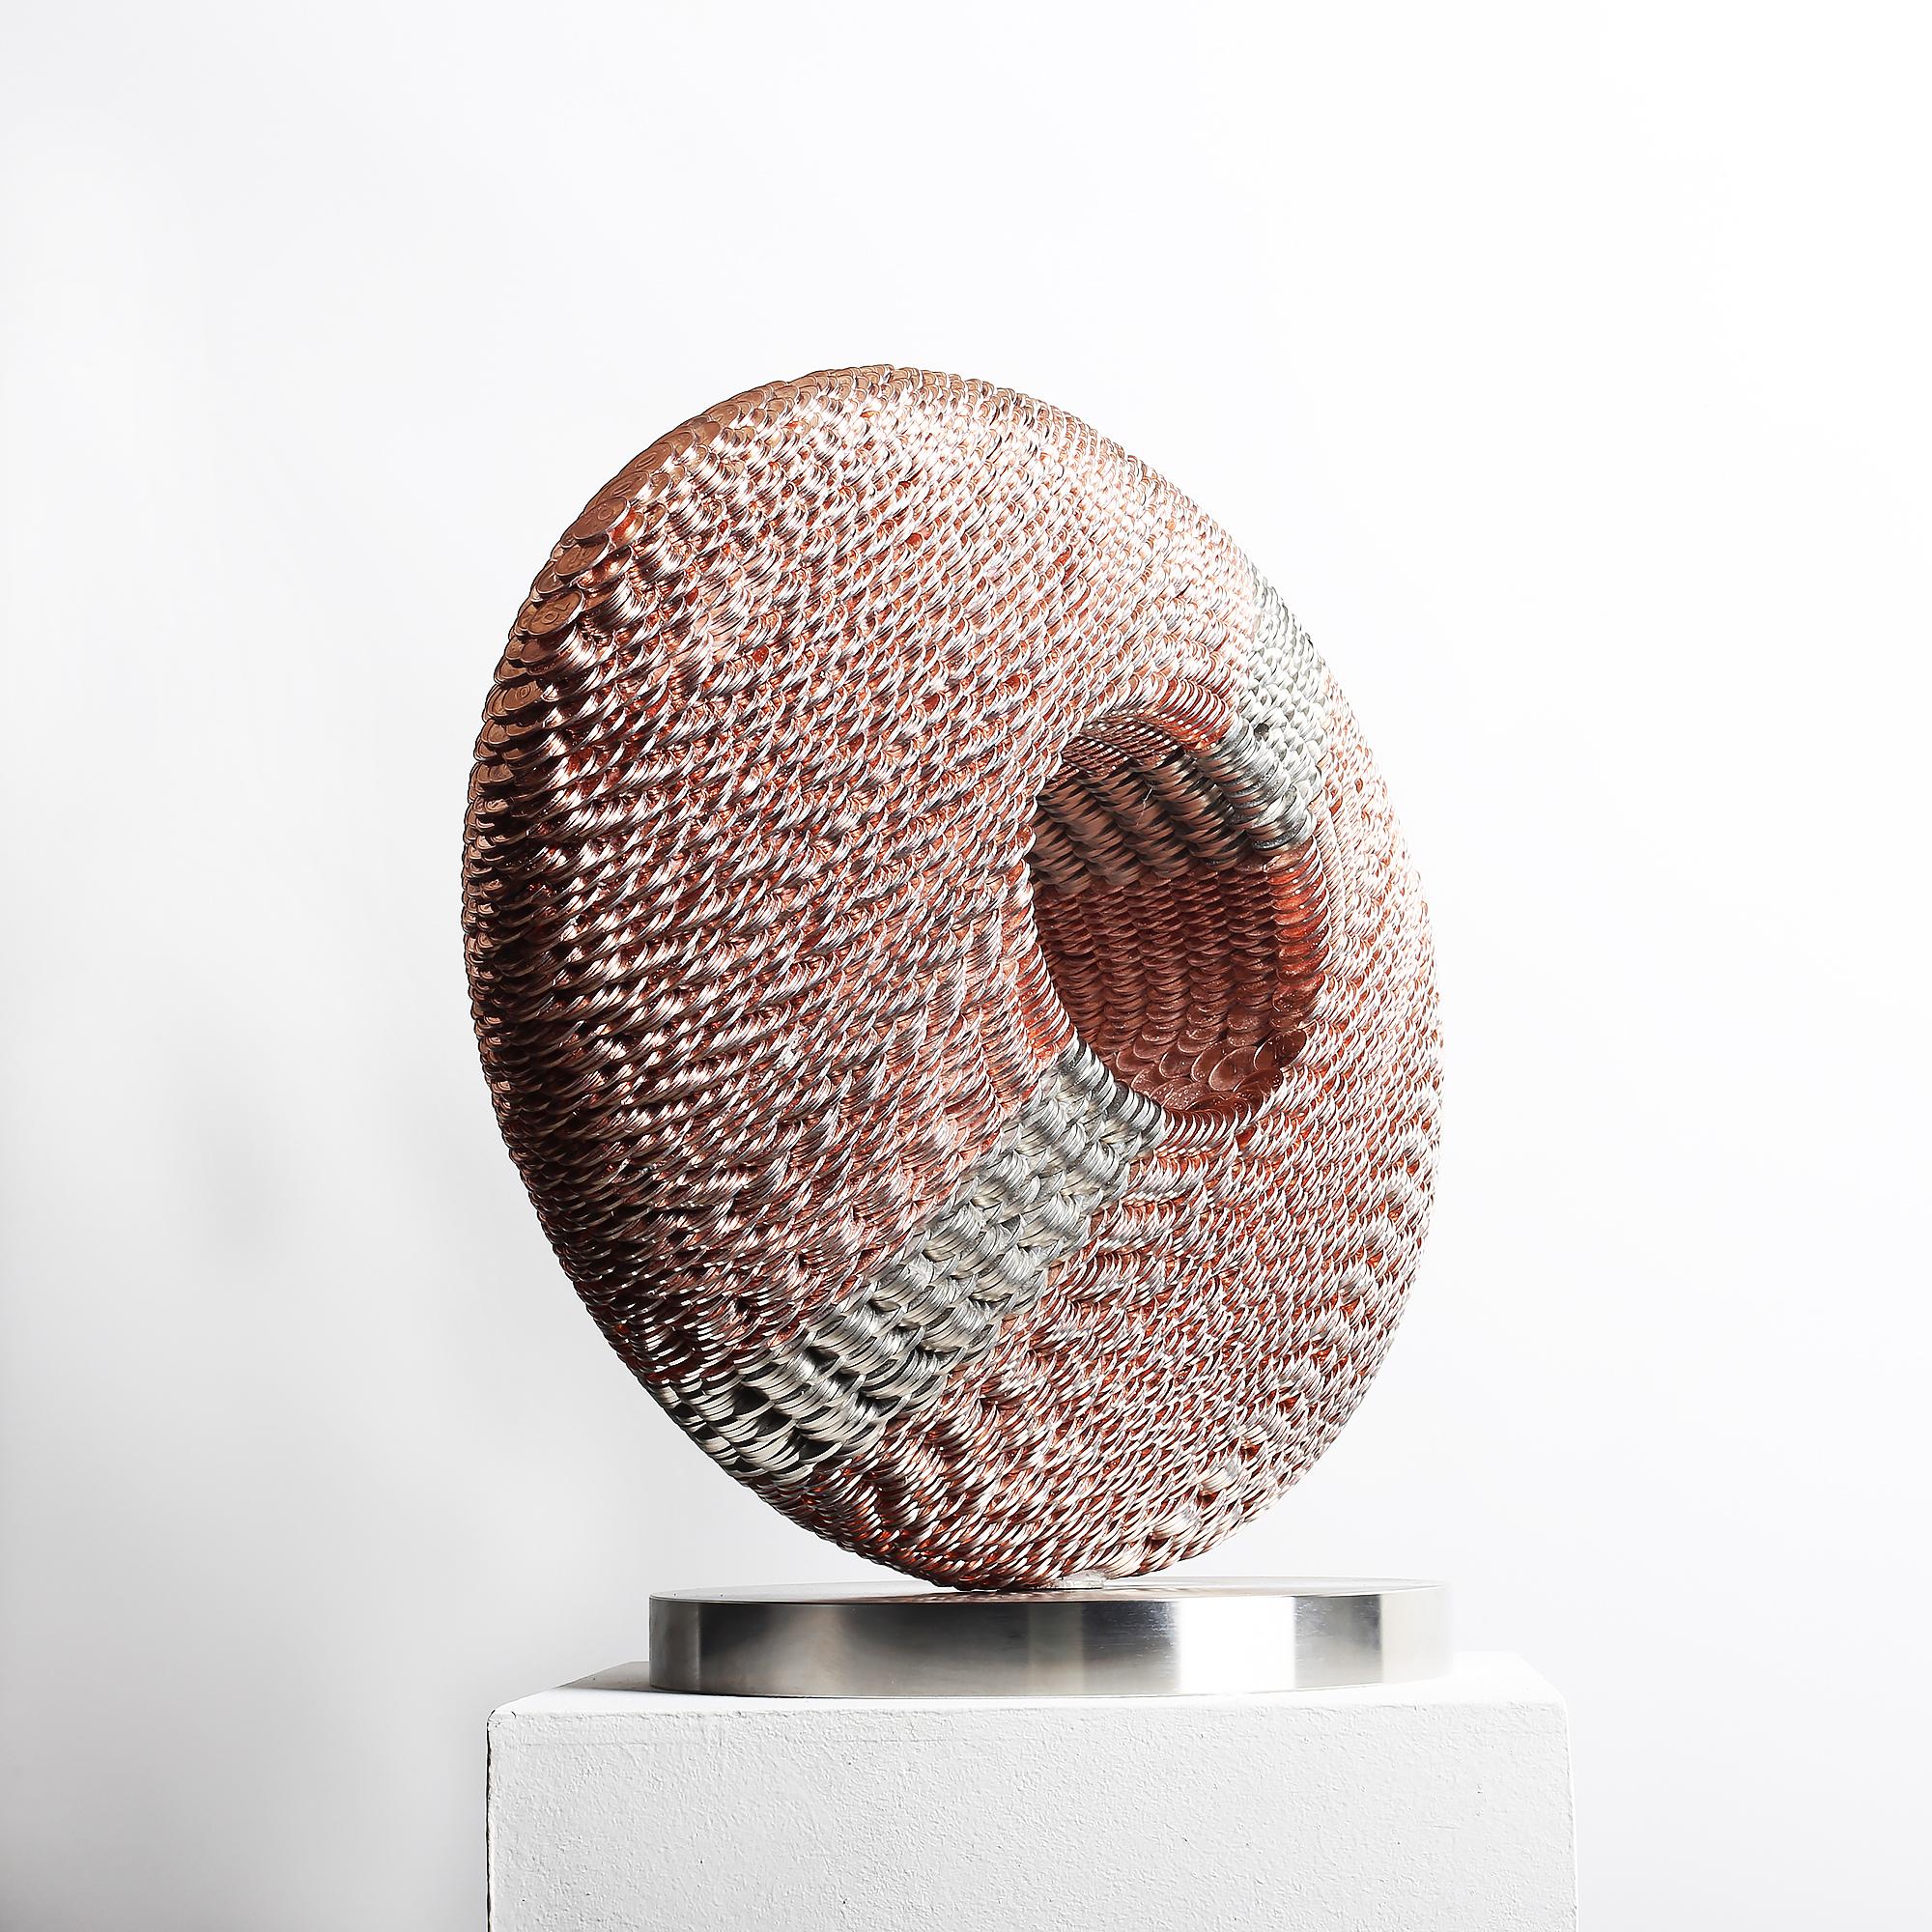 Kinetic sculpture made from coins "Circle XIV" by Kim Seungwoo